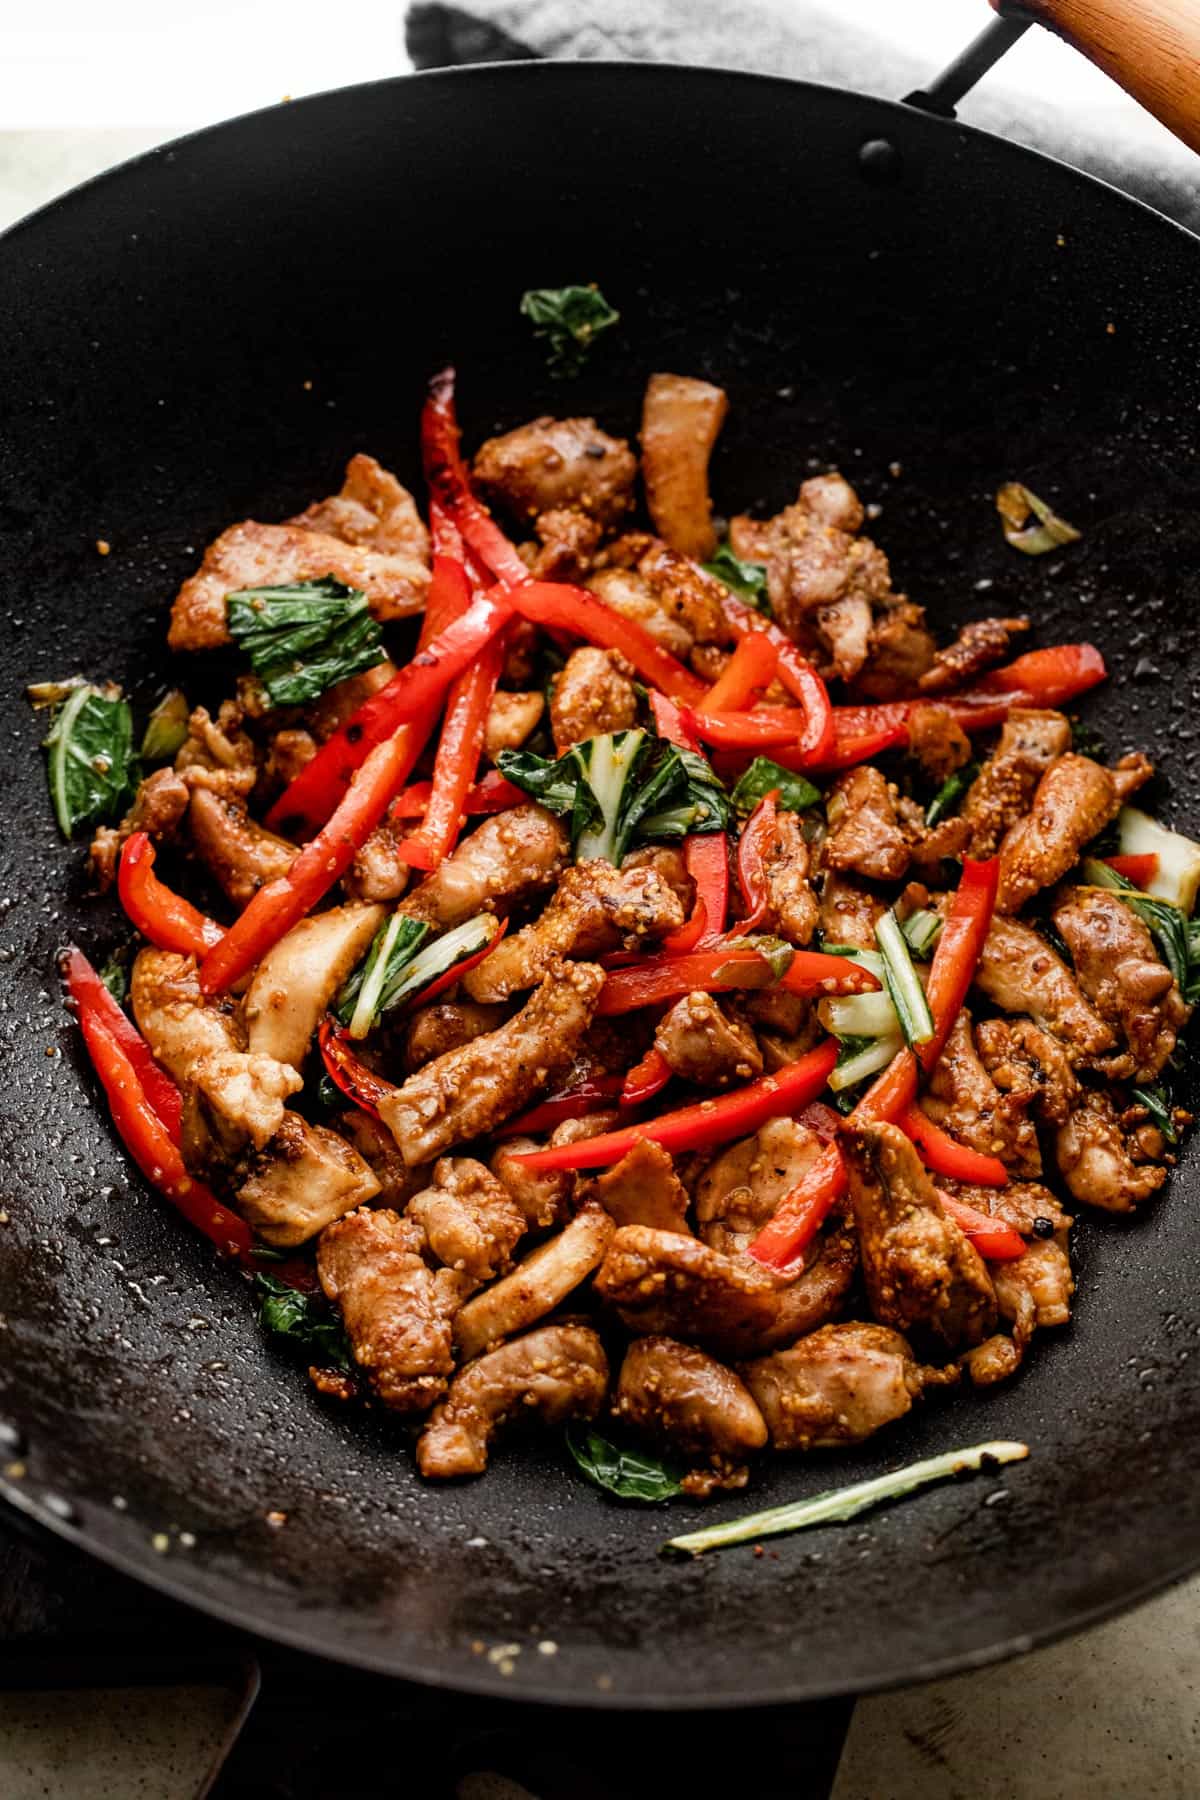 Salt and Pepper Chicken cooking in a black wok.